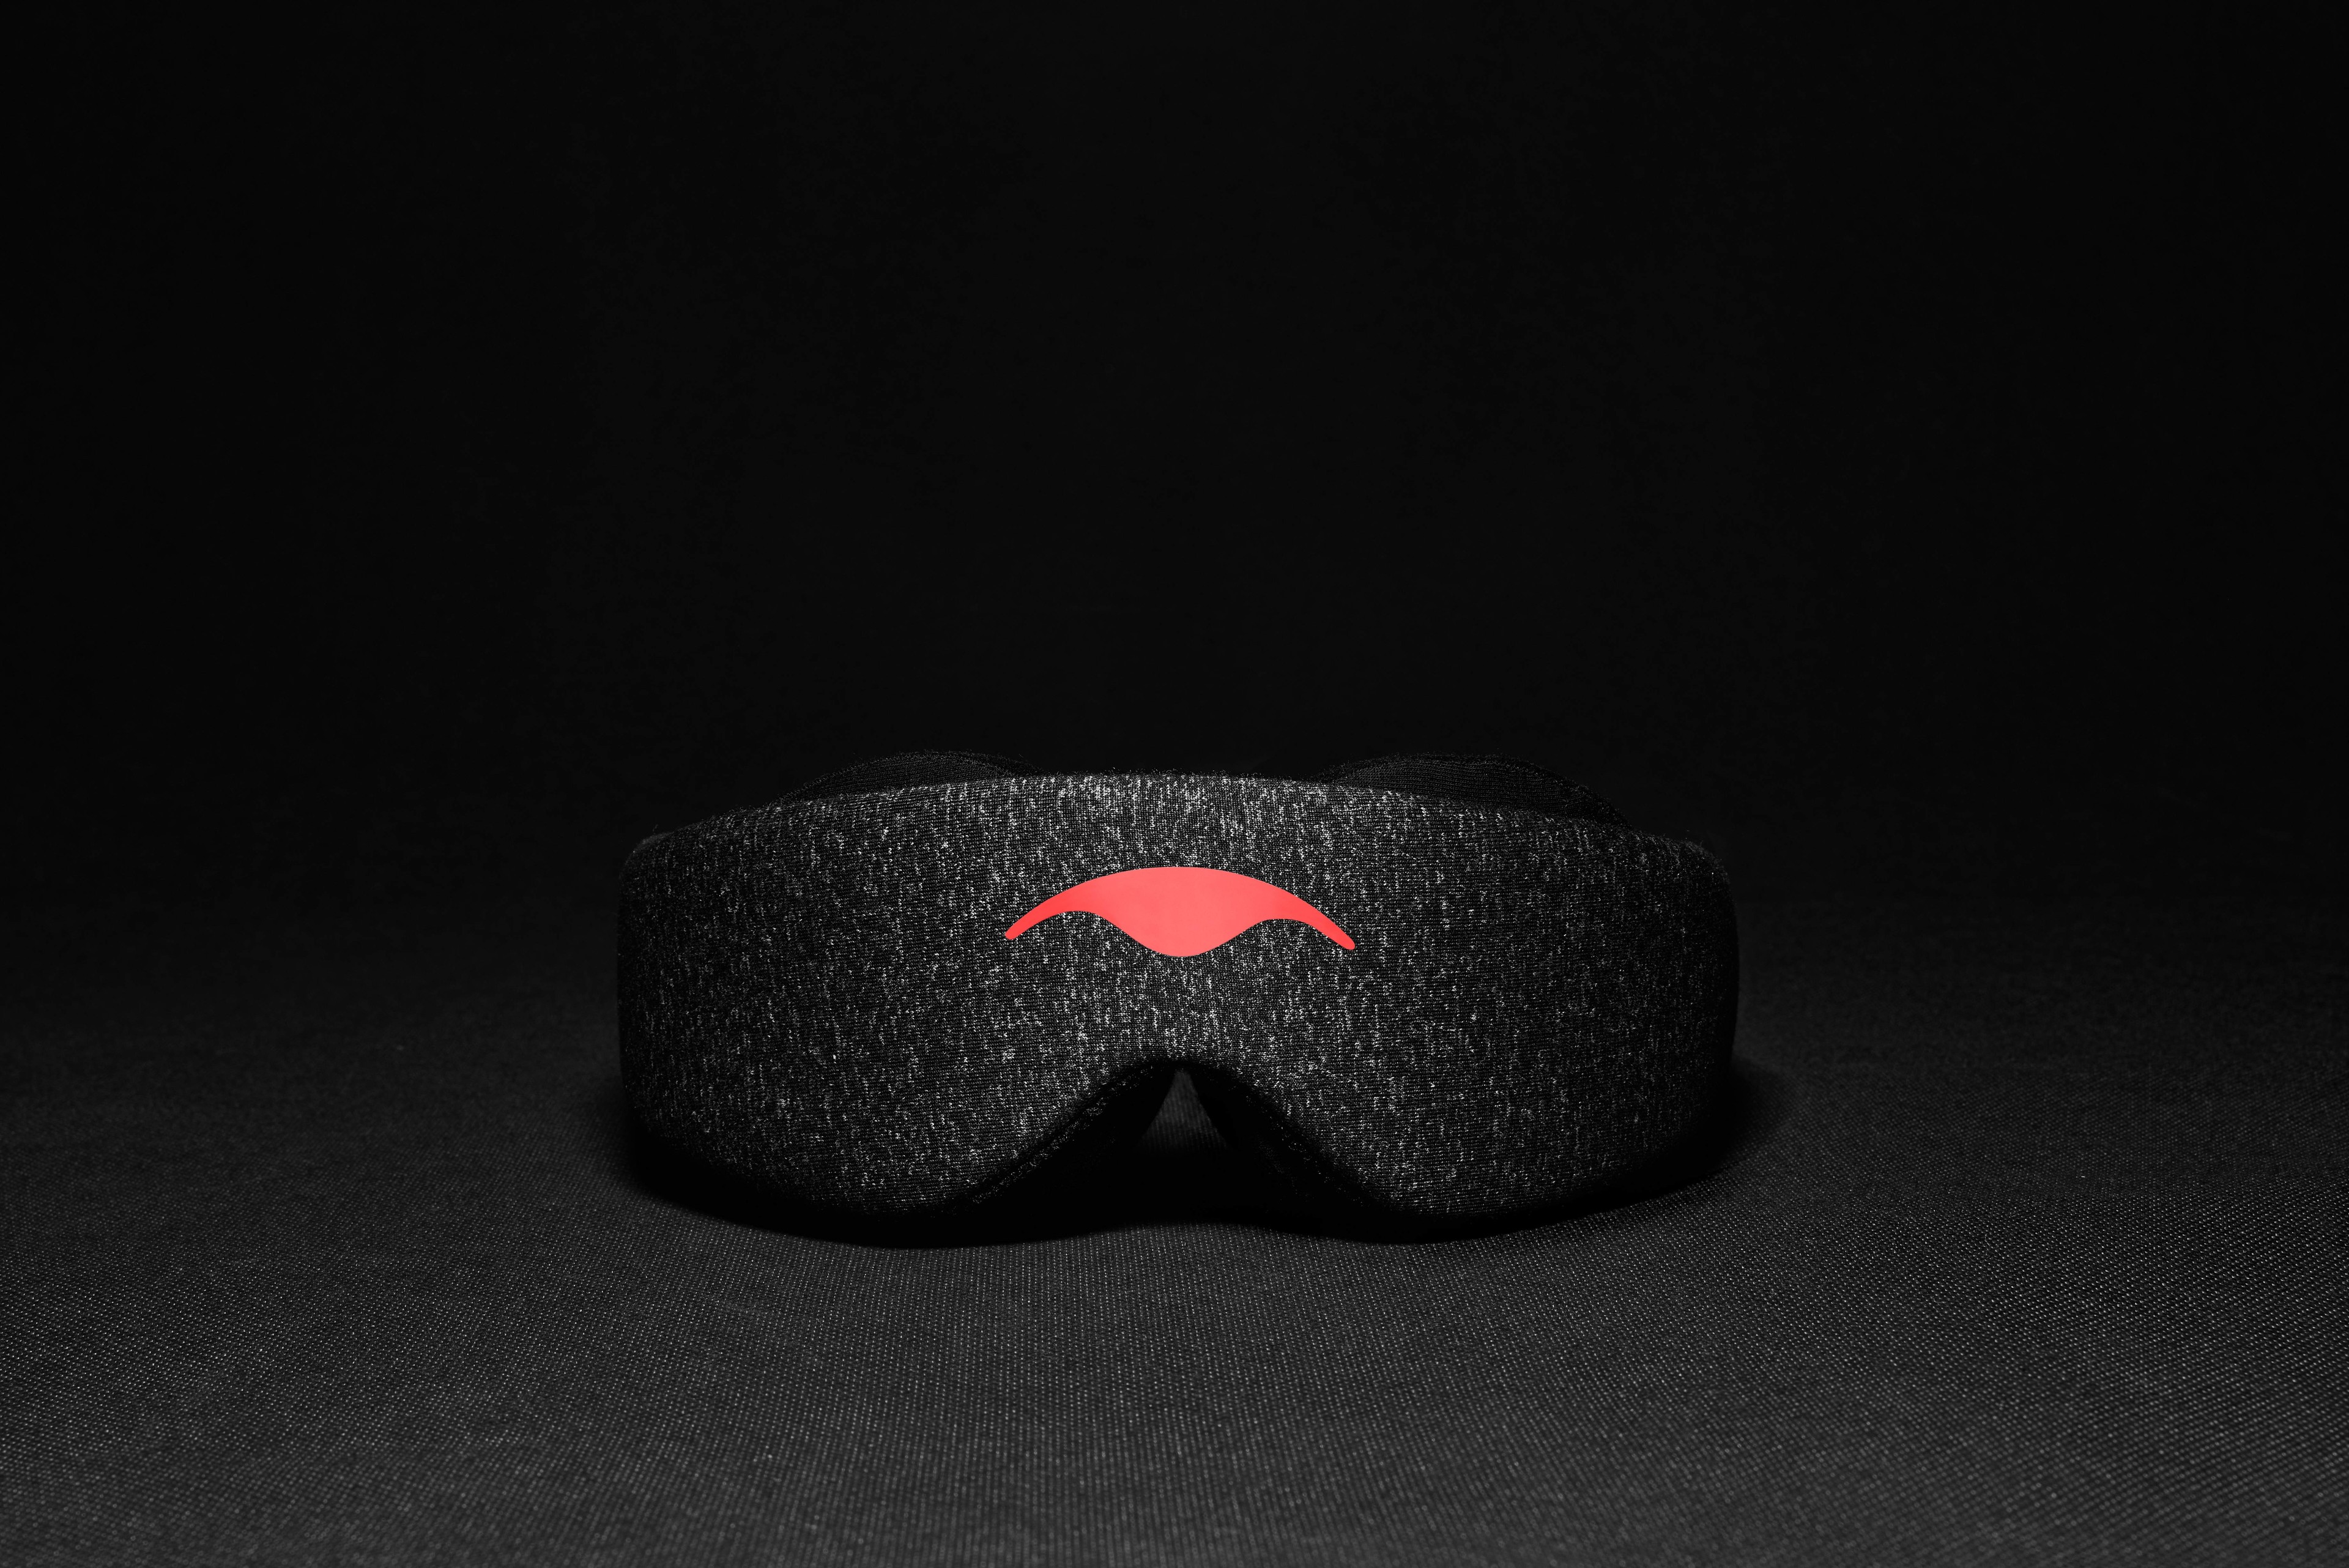 A black sleep mask with eye cups against a black background.